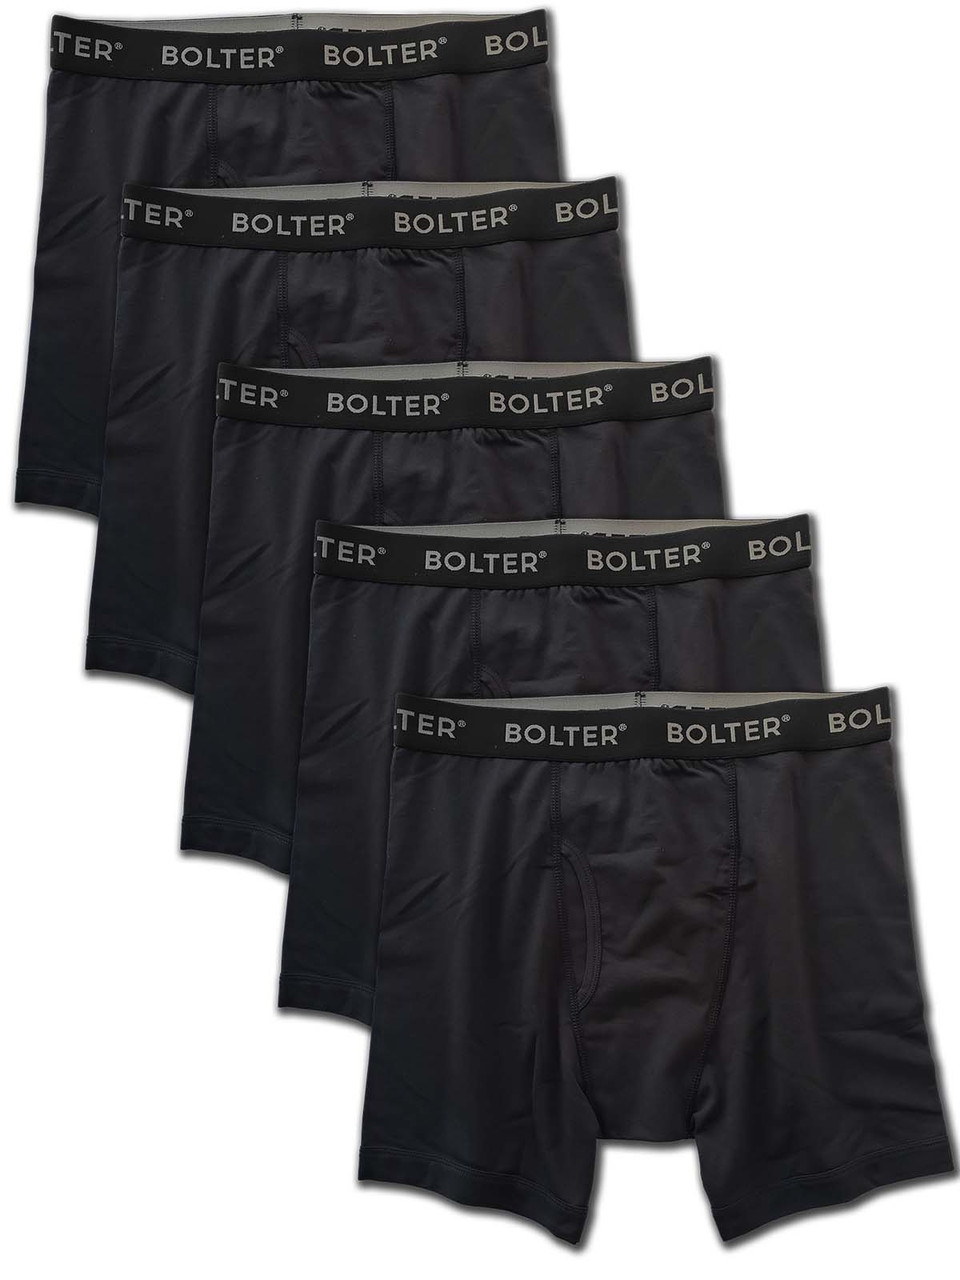 Boxer Brief Underwear- Fitted INT C6 MAX Black - Majestic Safety Apparel